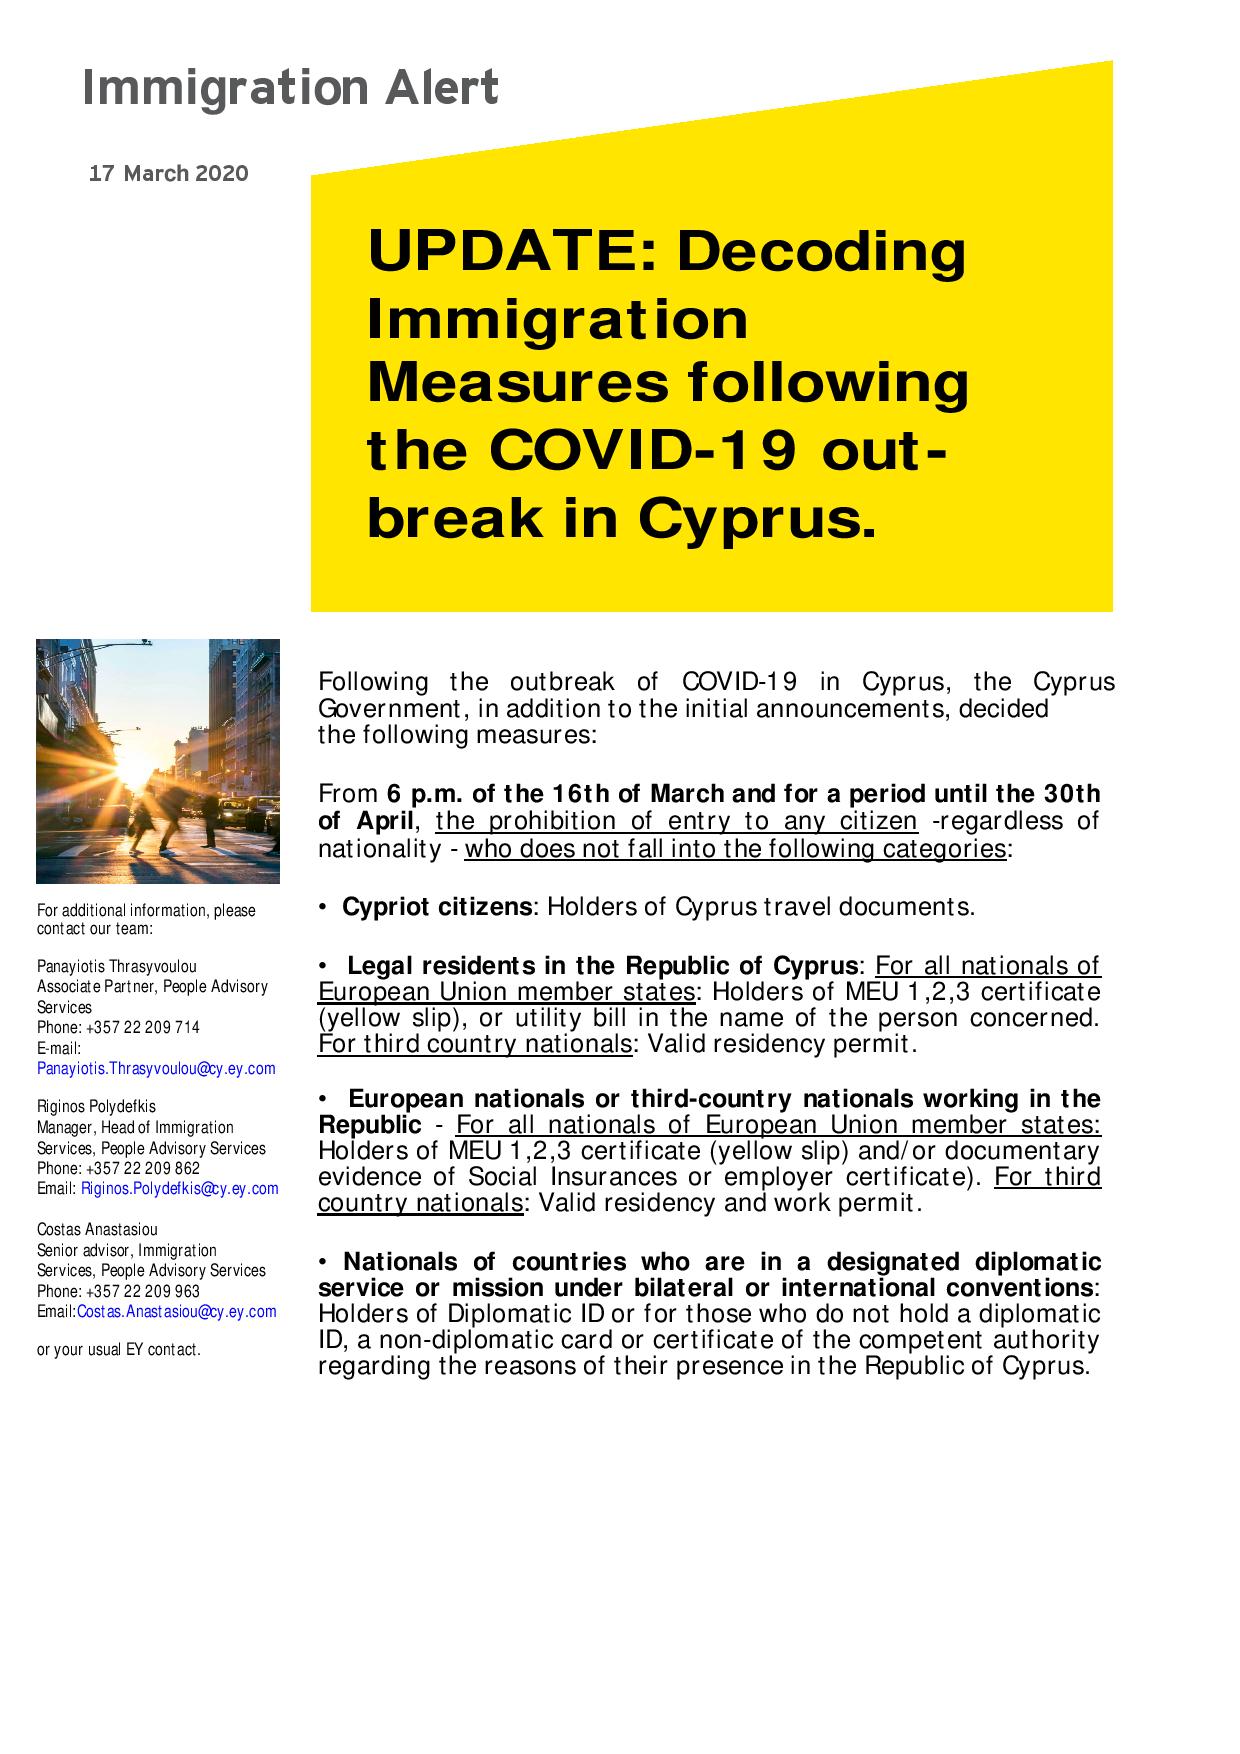 EY Cyprus: UPDATE: Decoding Immigration Measures following the COVID-19 outbreak in Cyprus